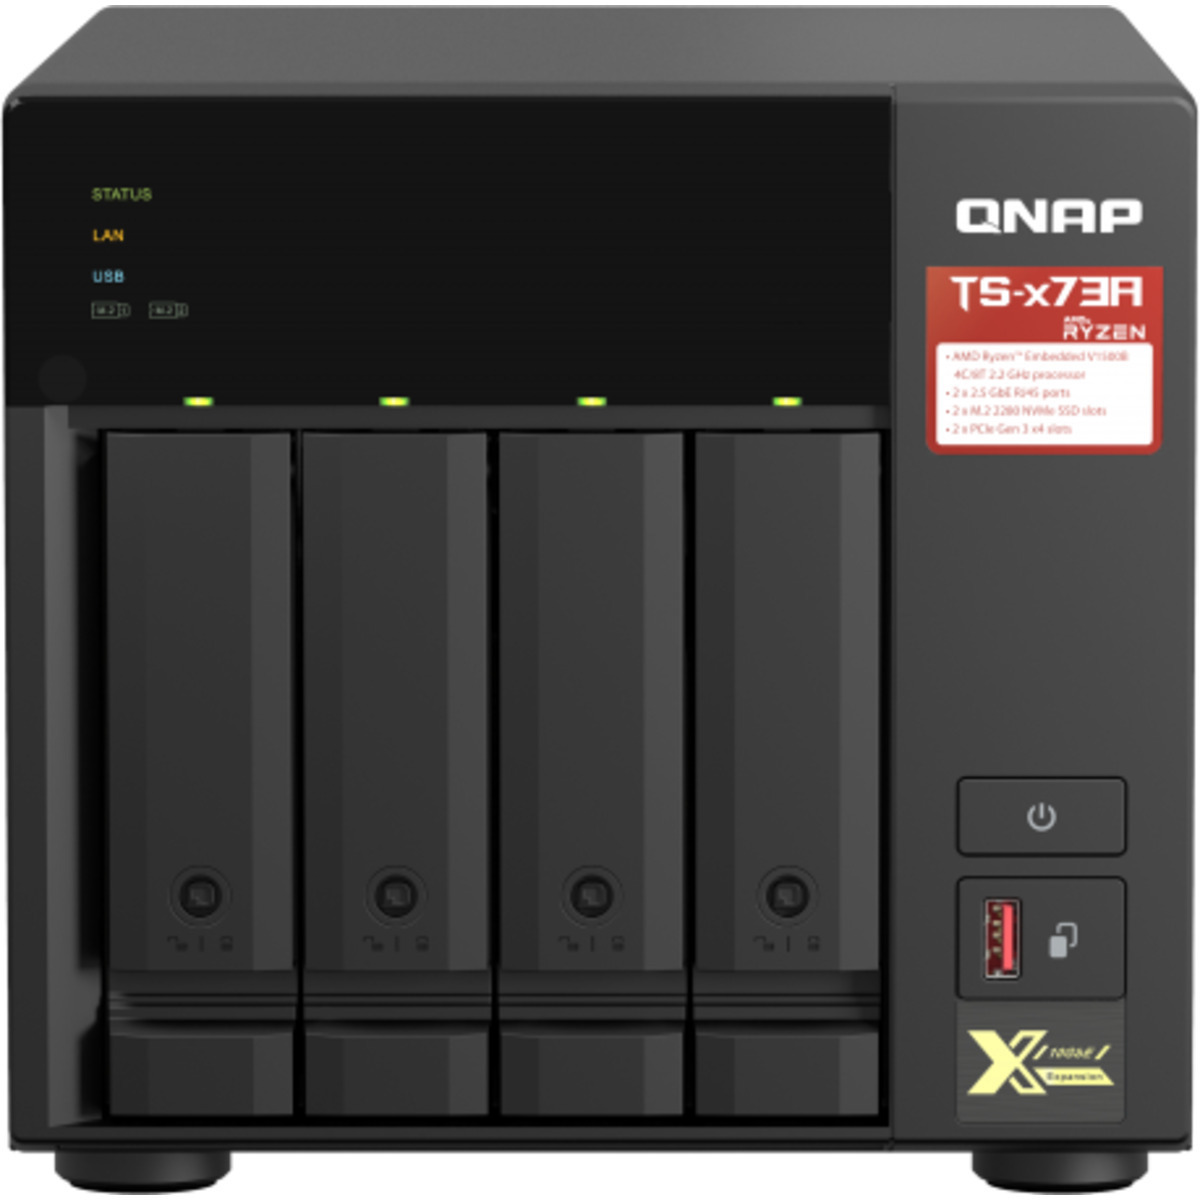 buy $2051 QNAP TS-473A 32tb Desktop NAS - Network Attached Storage Device 4x8000gb Western Digital Gold WD8004FRYZ 3.5 7200rpm SATA 6Gb/s HDD ENTERPRISE Class Drives Installed - Burn-In Tested - nas headquarters buy network attached storage server device das new raid-5 free shipping simply usa TS-473A